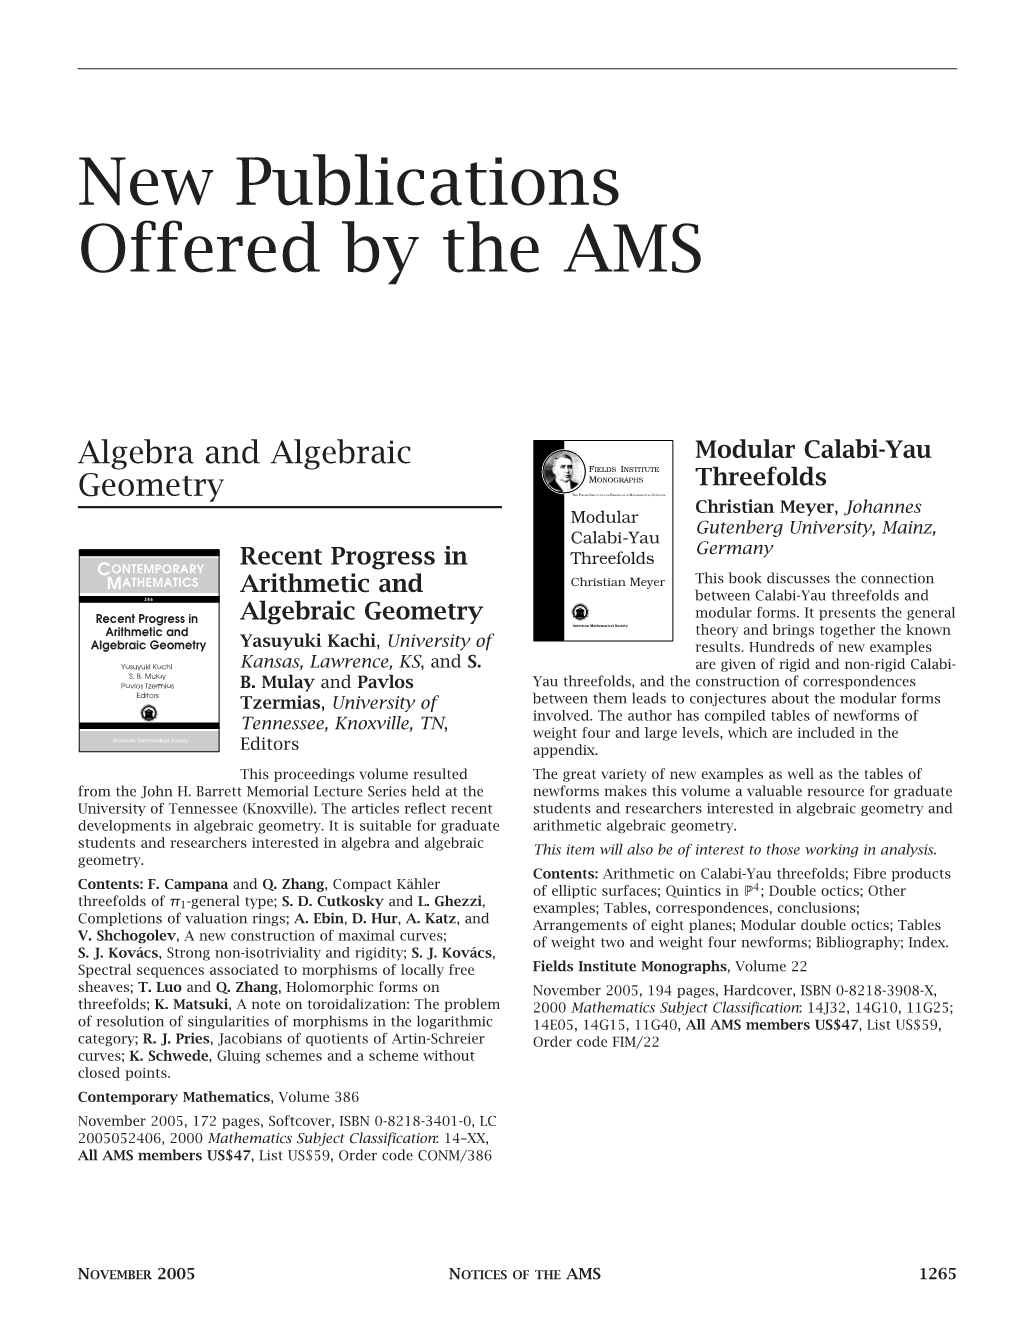 New Publications Offered by the AMS